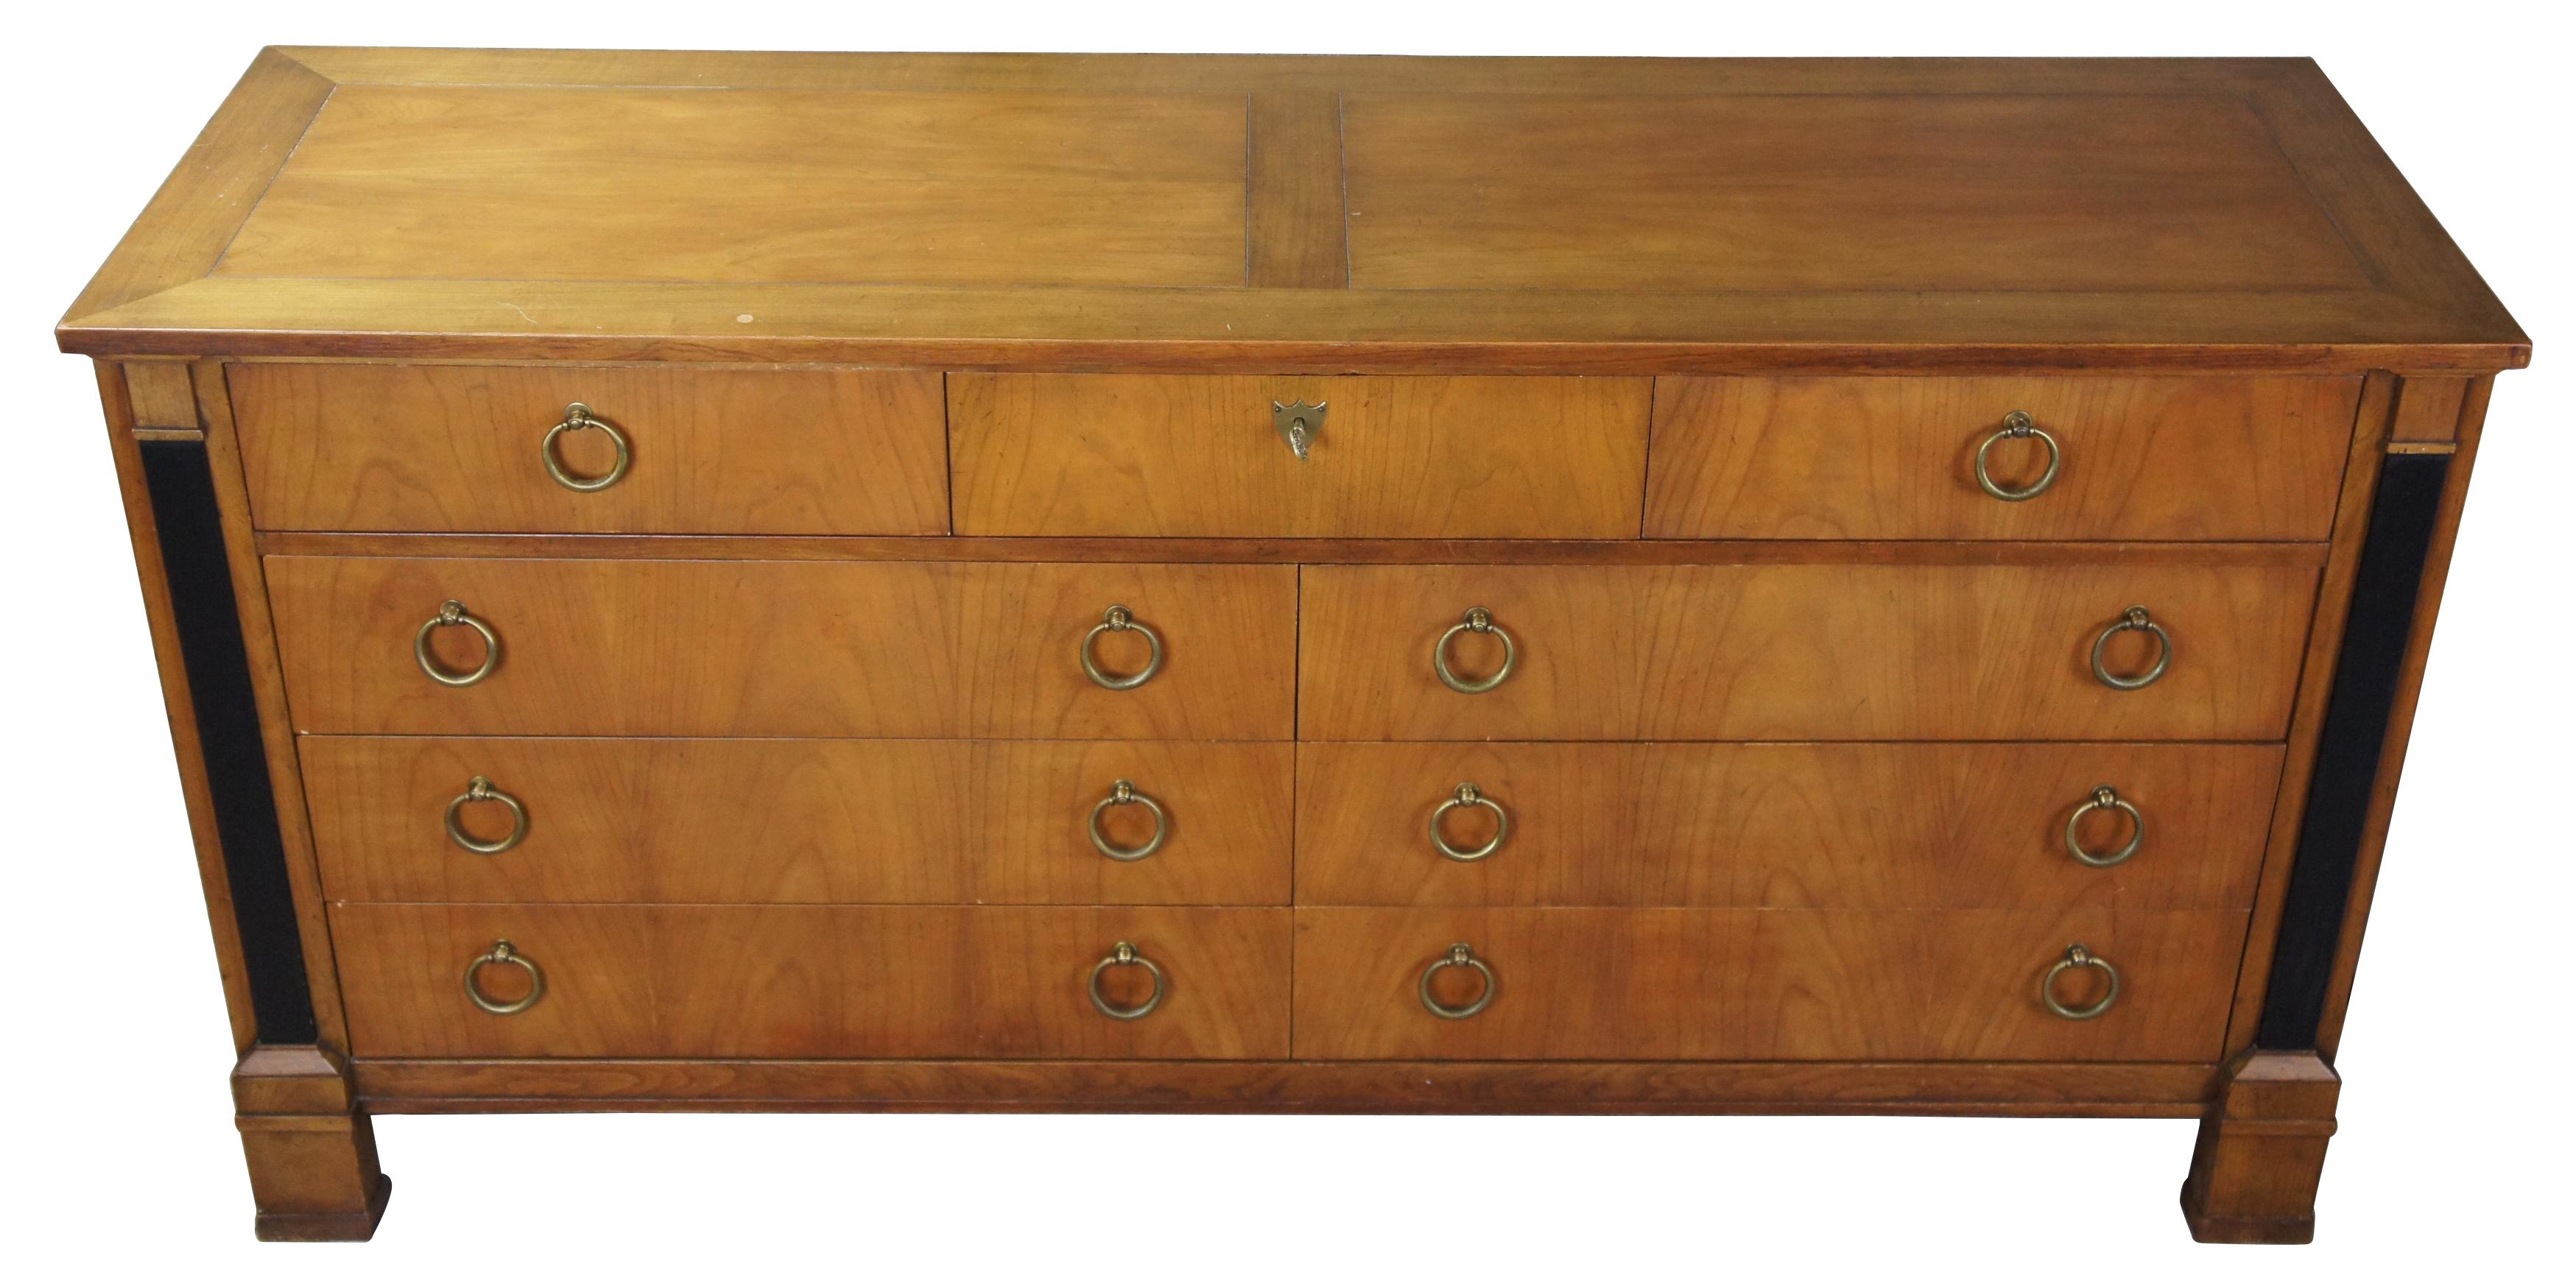 Baker Furniture neoclassical inspired chest of drawers, circa 1960s . Made from Fruitwood with ebonized mounts along the outside, nine drawers and brass hardware. Measures: 64